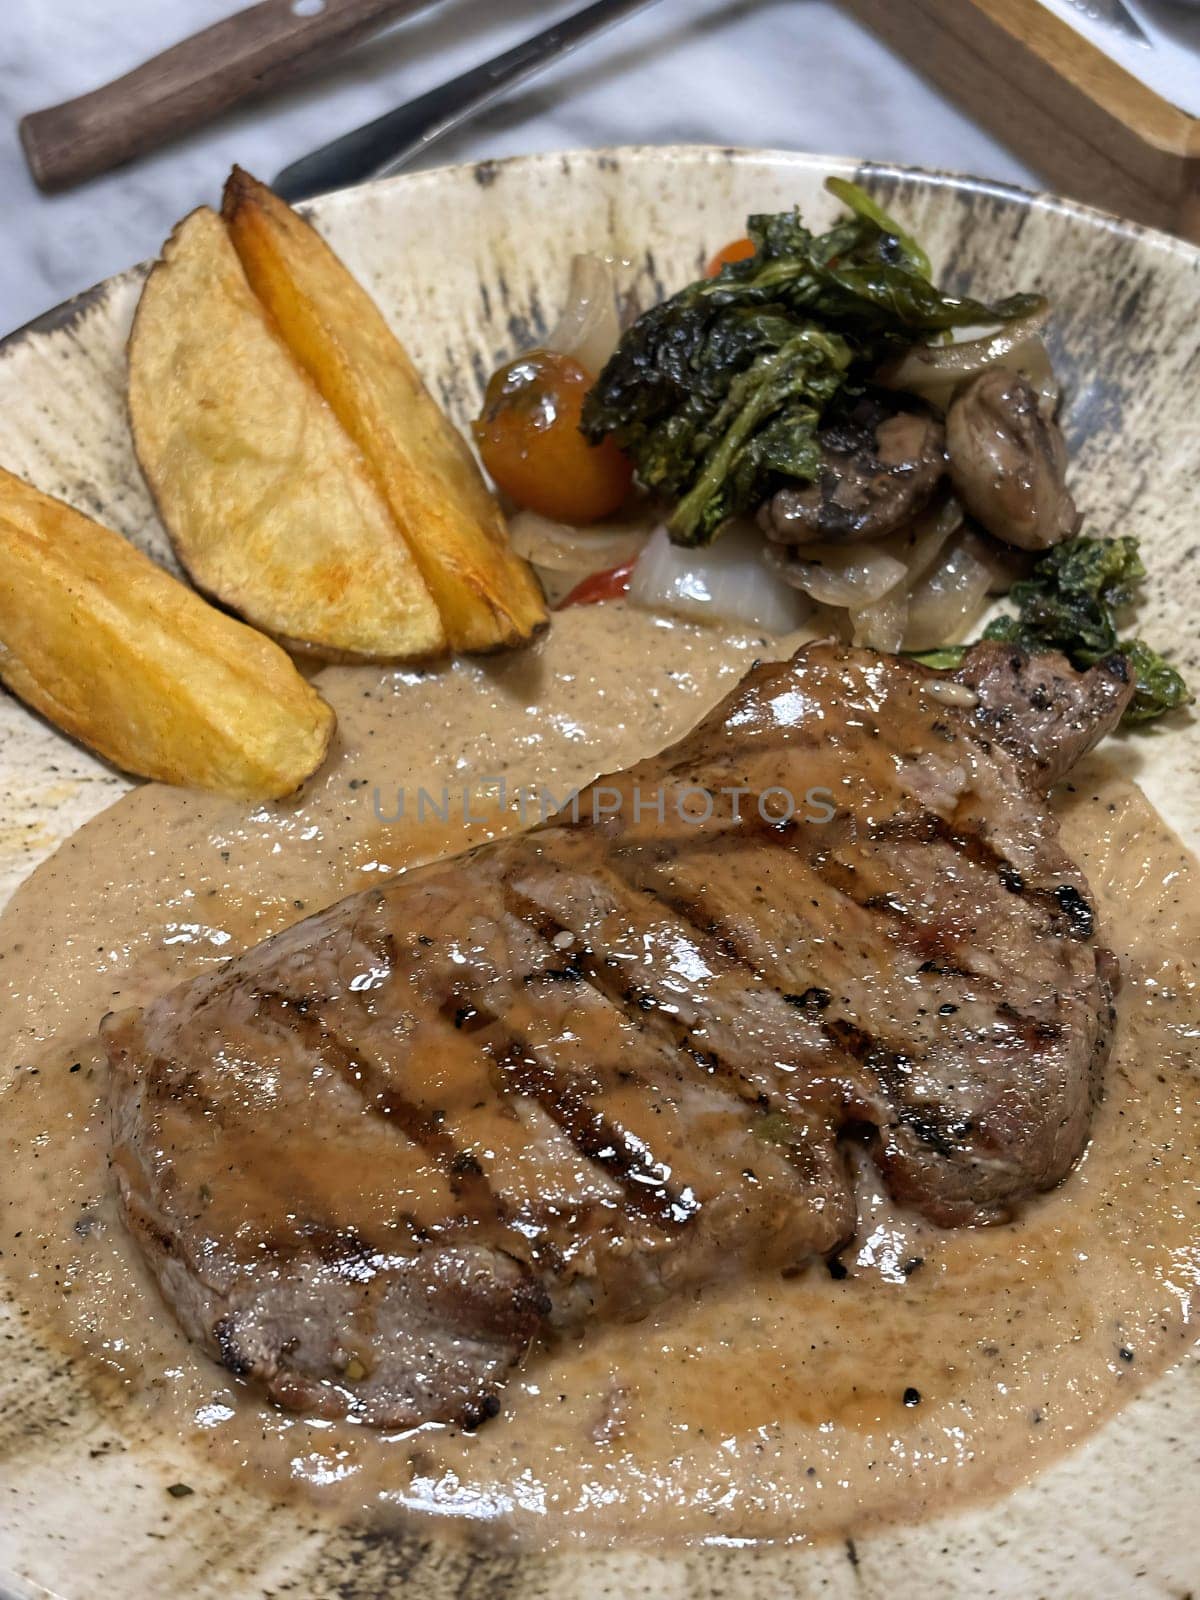 Sirloin steak grilled medium rare served with potatoes and salad with mushroom black pepper sauce by antoksena